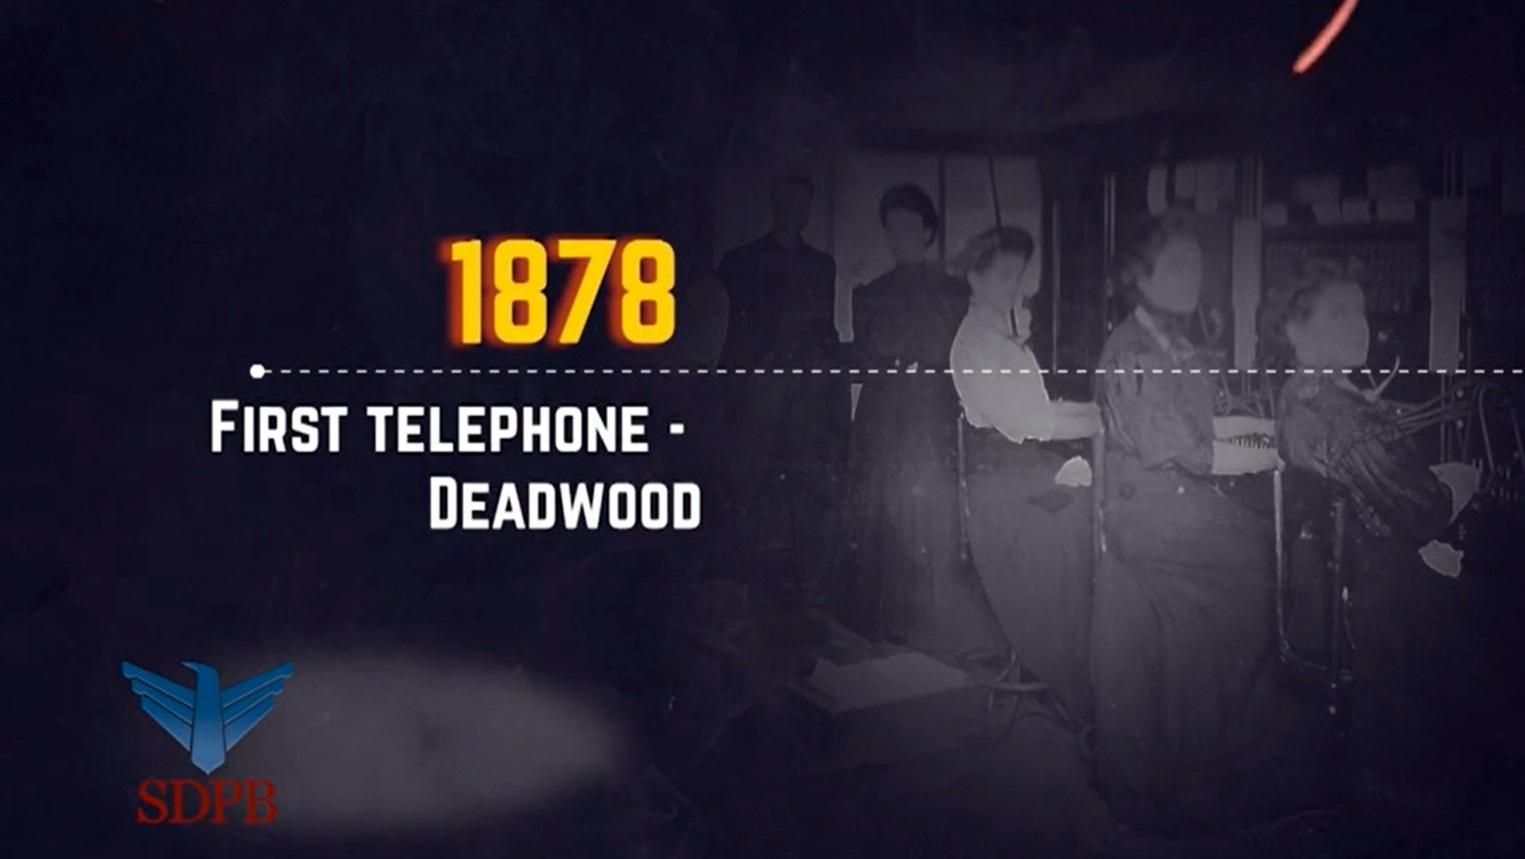 1878 - First Telephone was in Deadwood. 